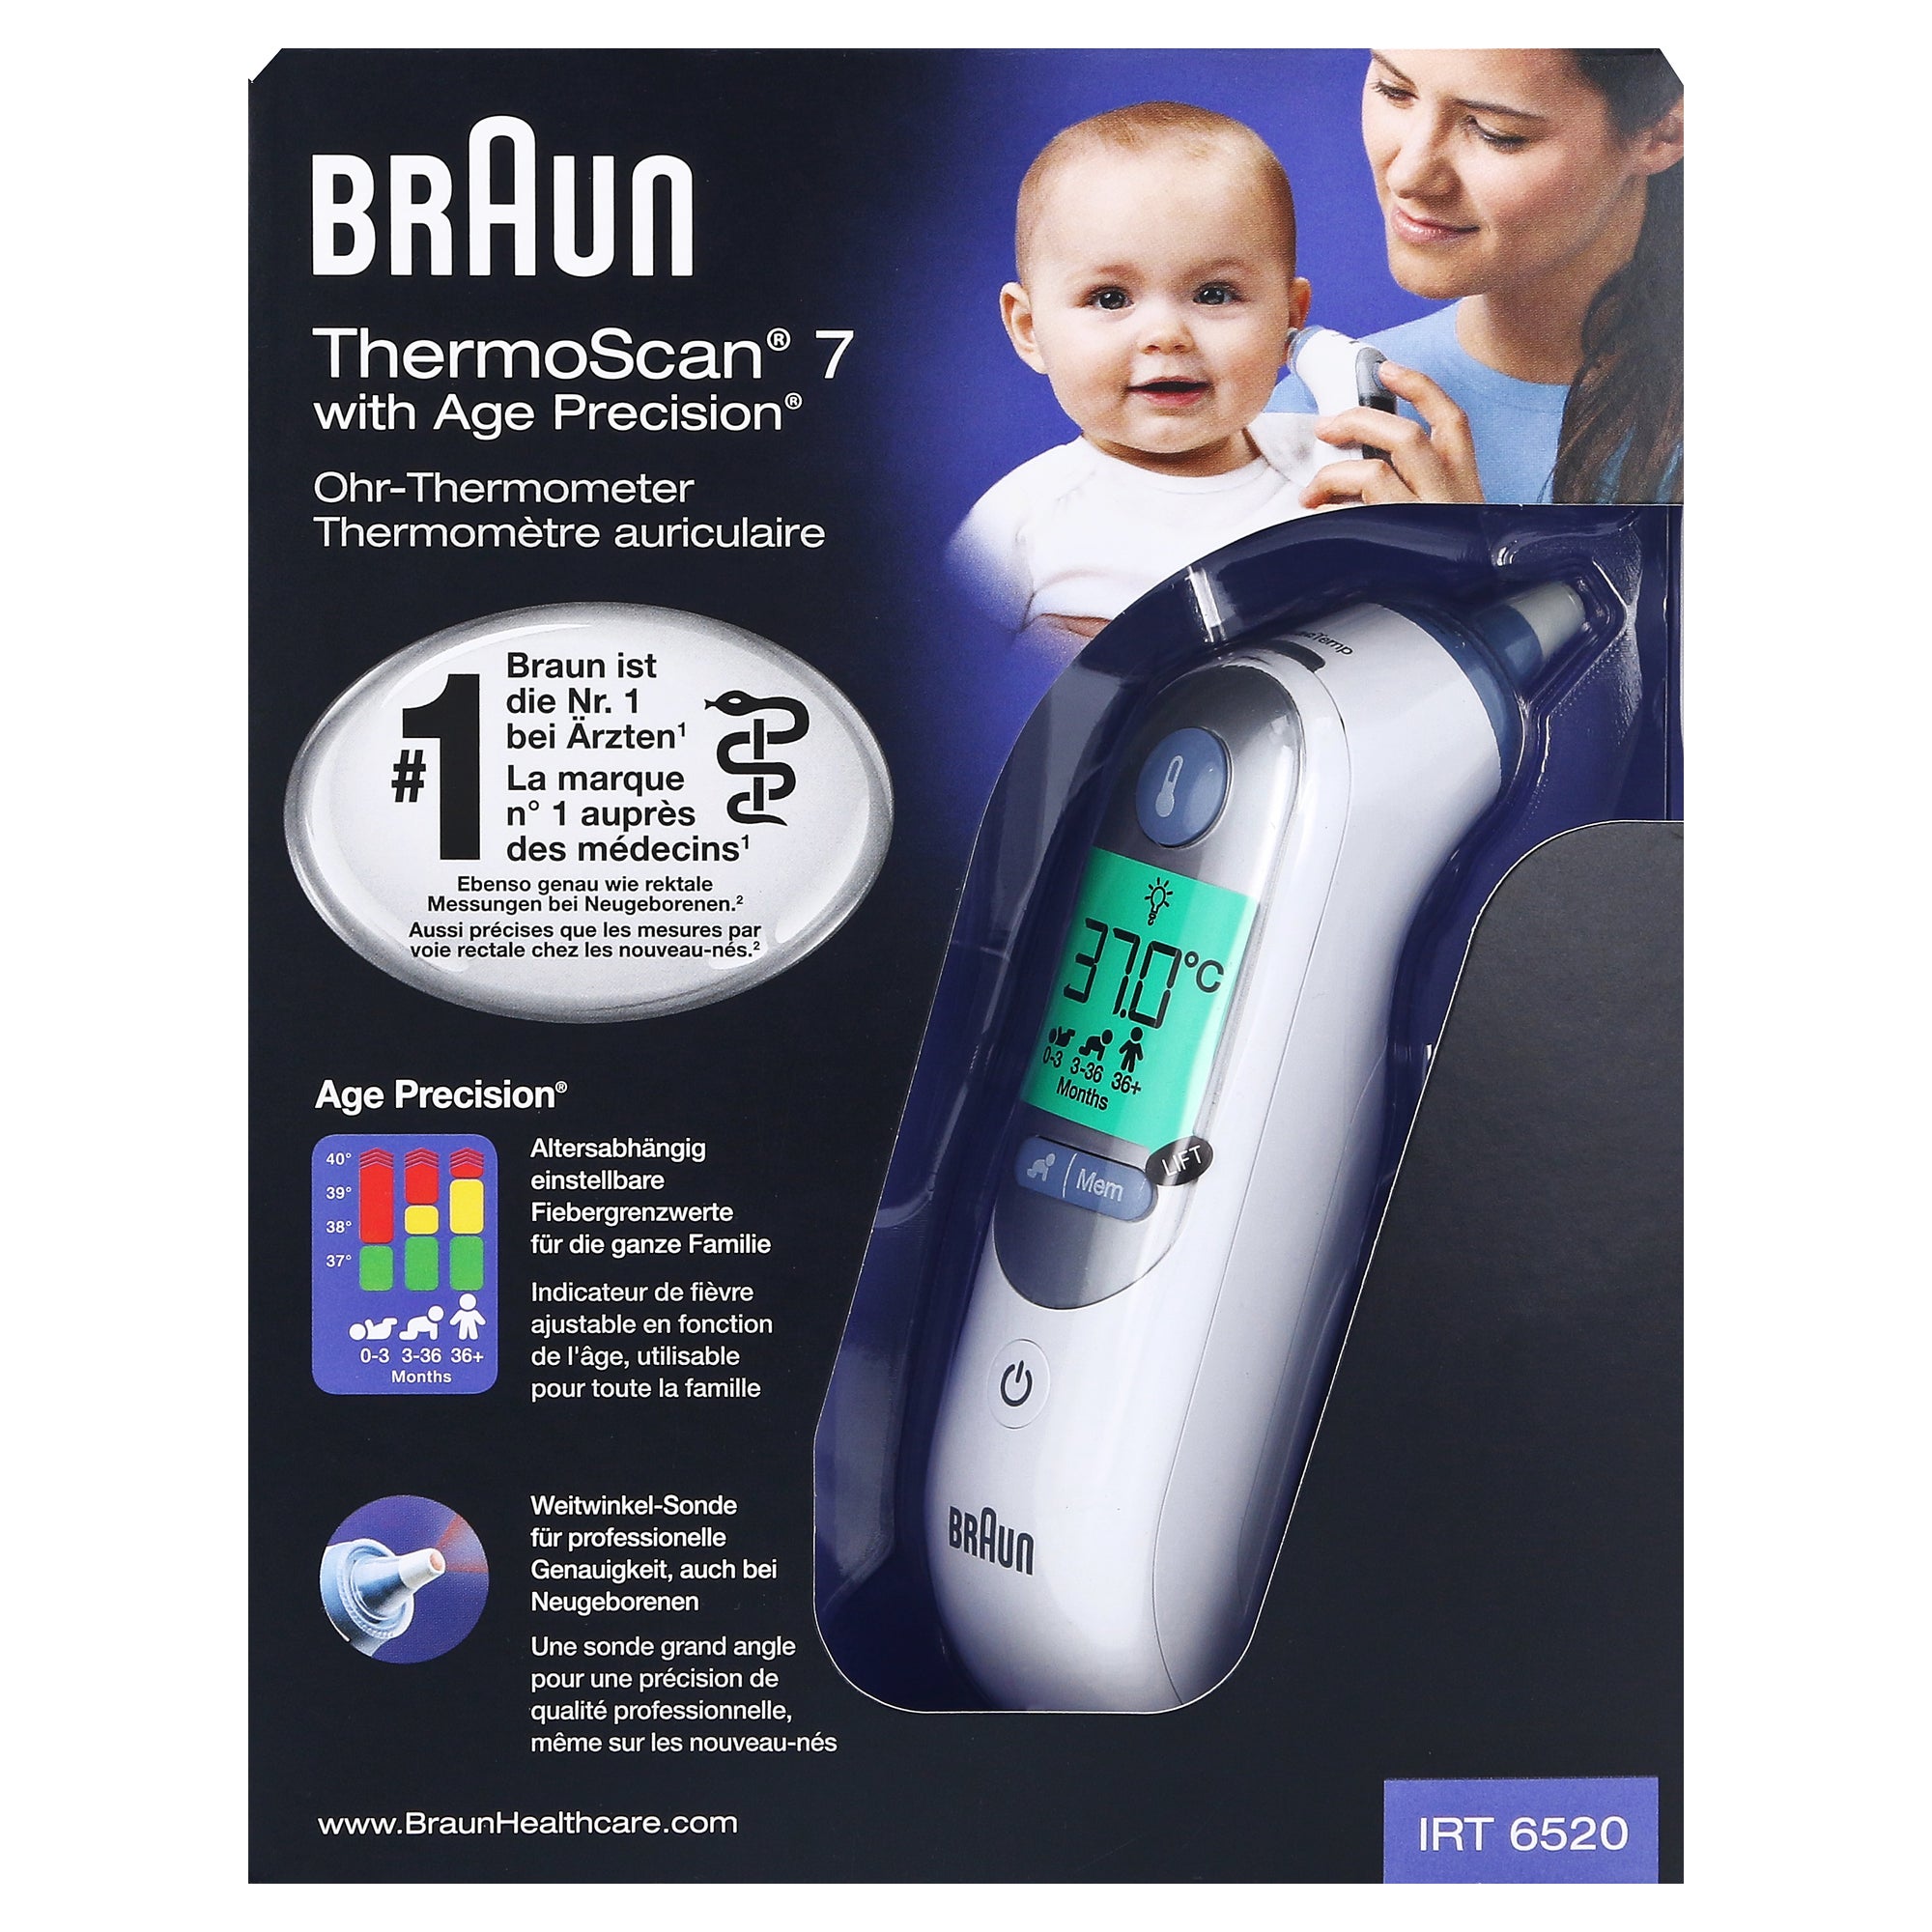 DocMorris 1 Thermoscan | online kaufen St. Ohrthermometer, Irt6520 7